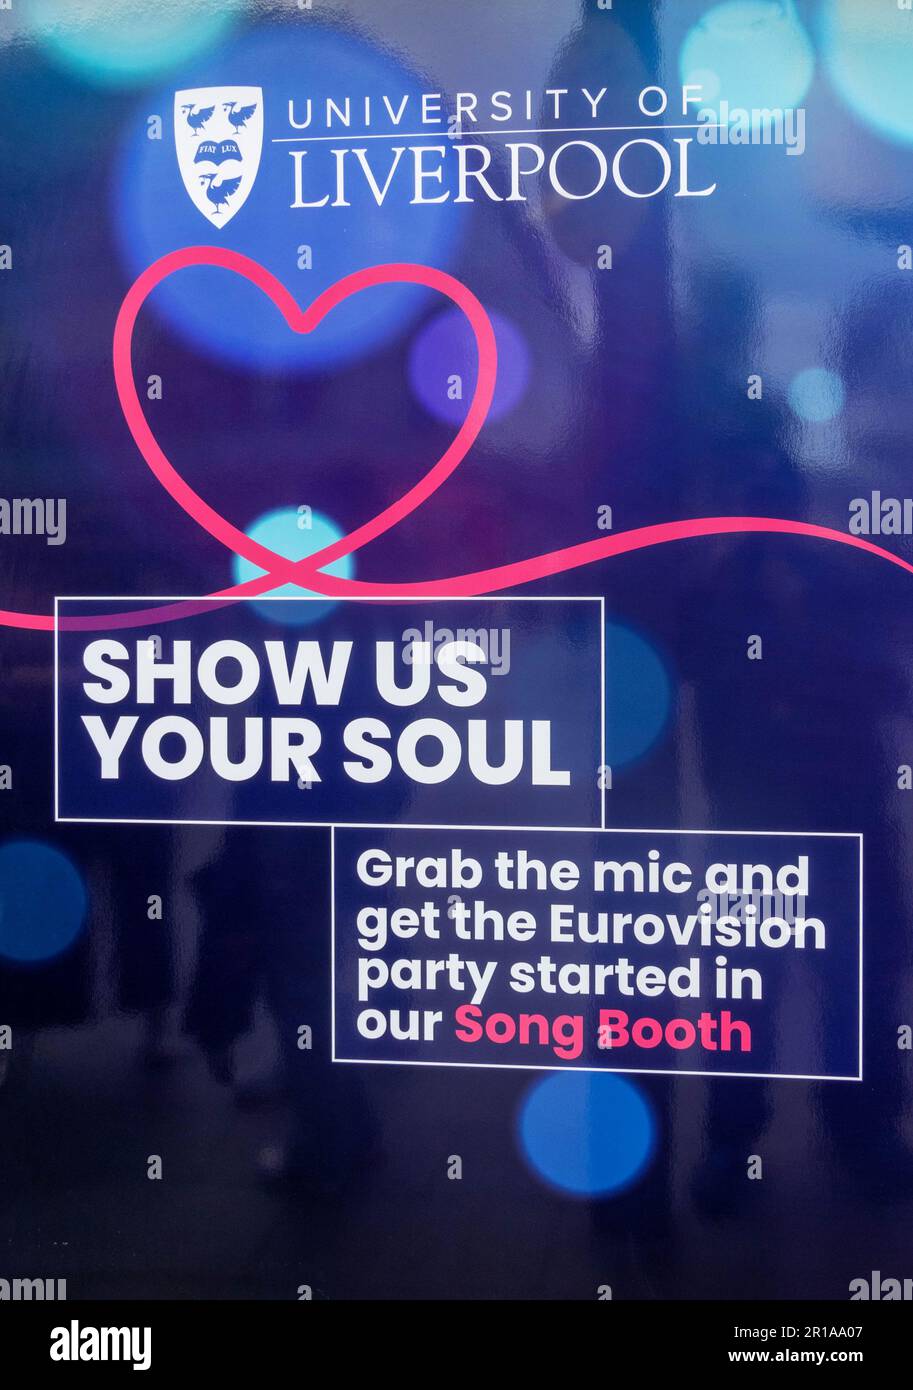 The University of Invitation Liverpool invitation to use their song booth during Eurovision 2023 Stock Photo